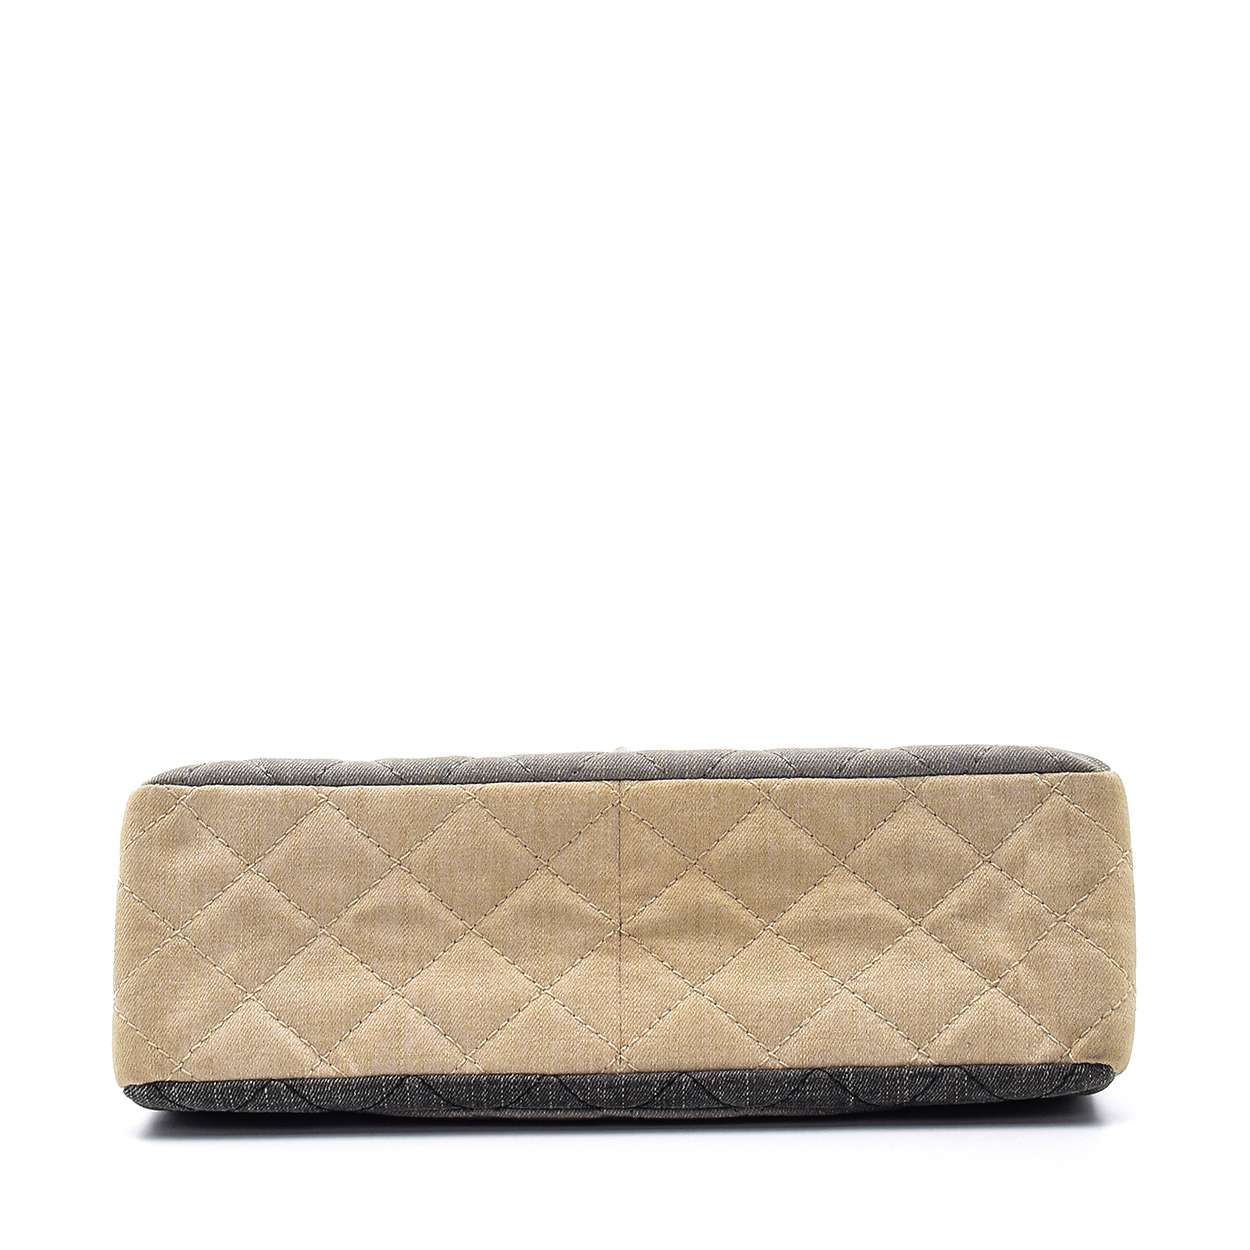 Chanel - Grey Tricolor 2.55 Reissue Quilted Fabric Flap Bag